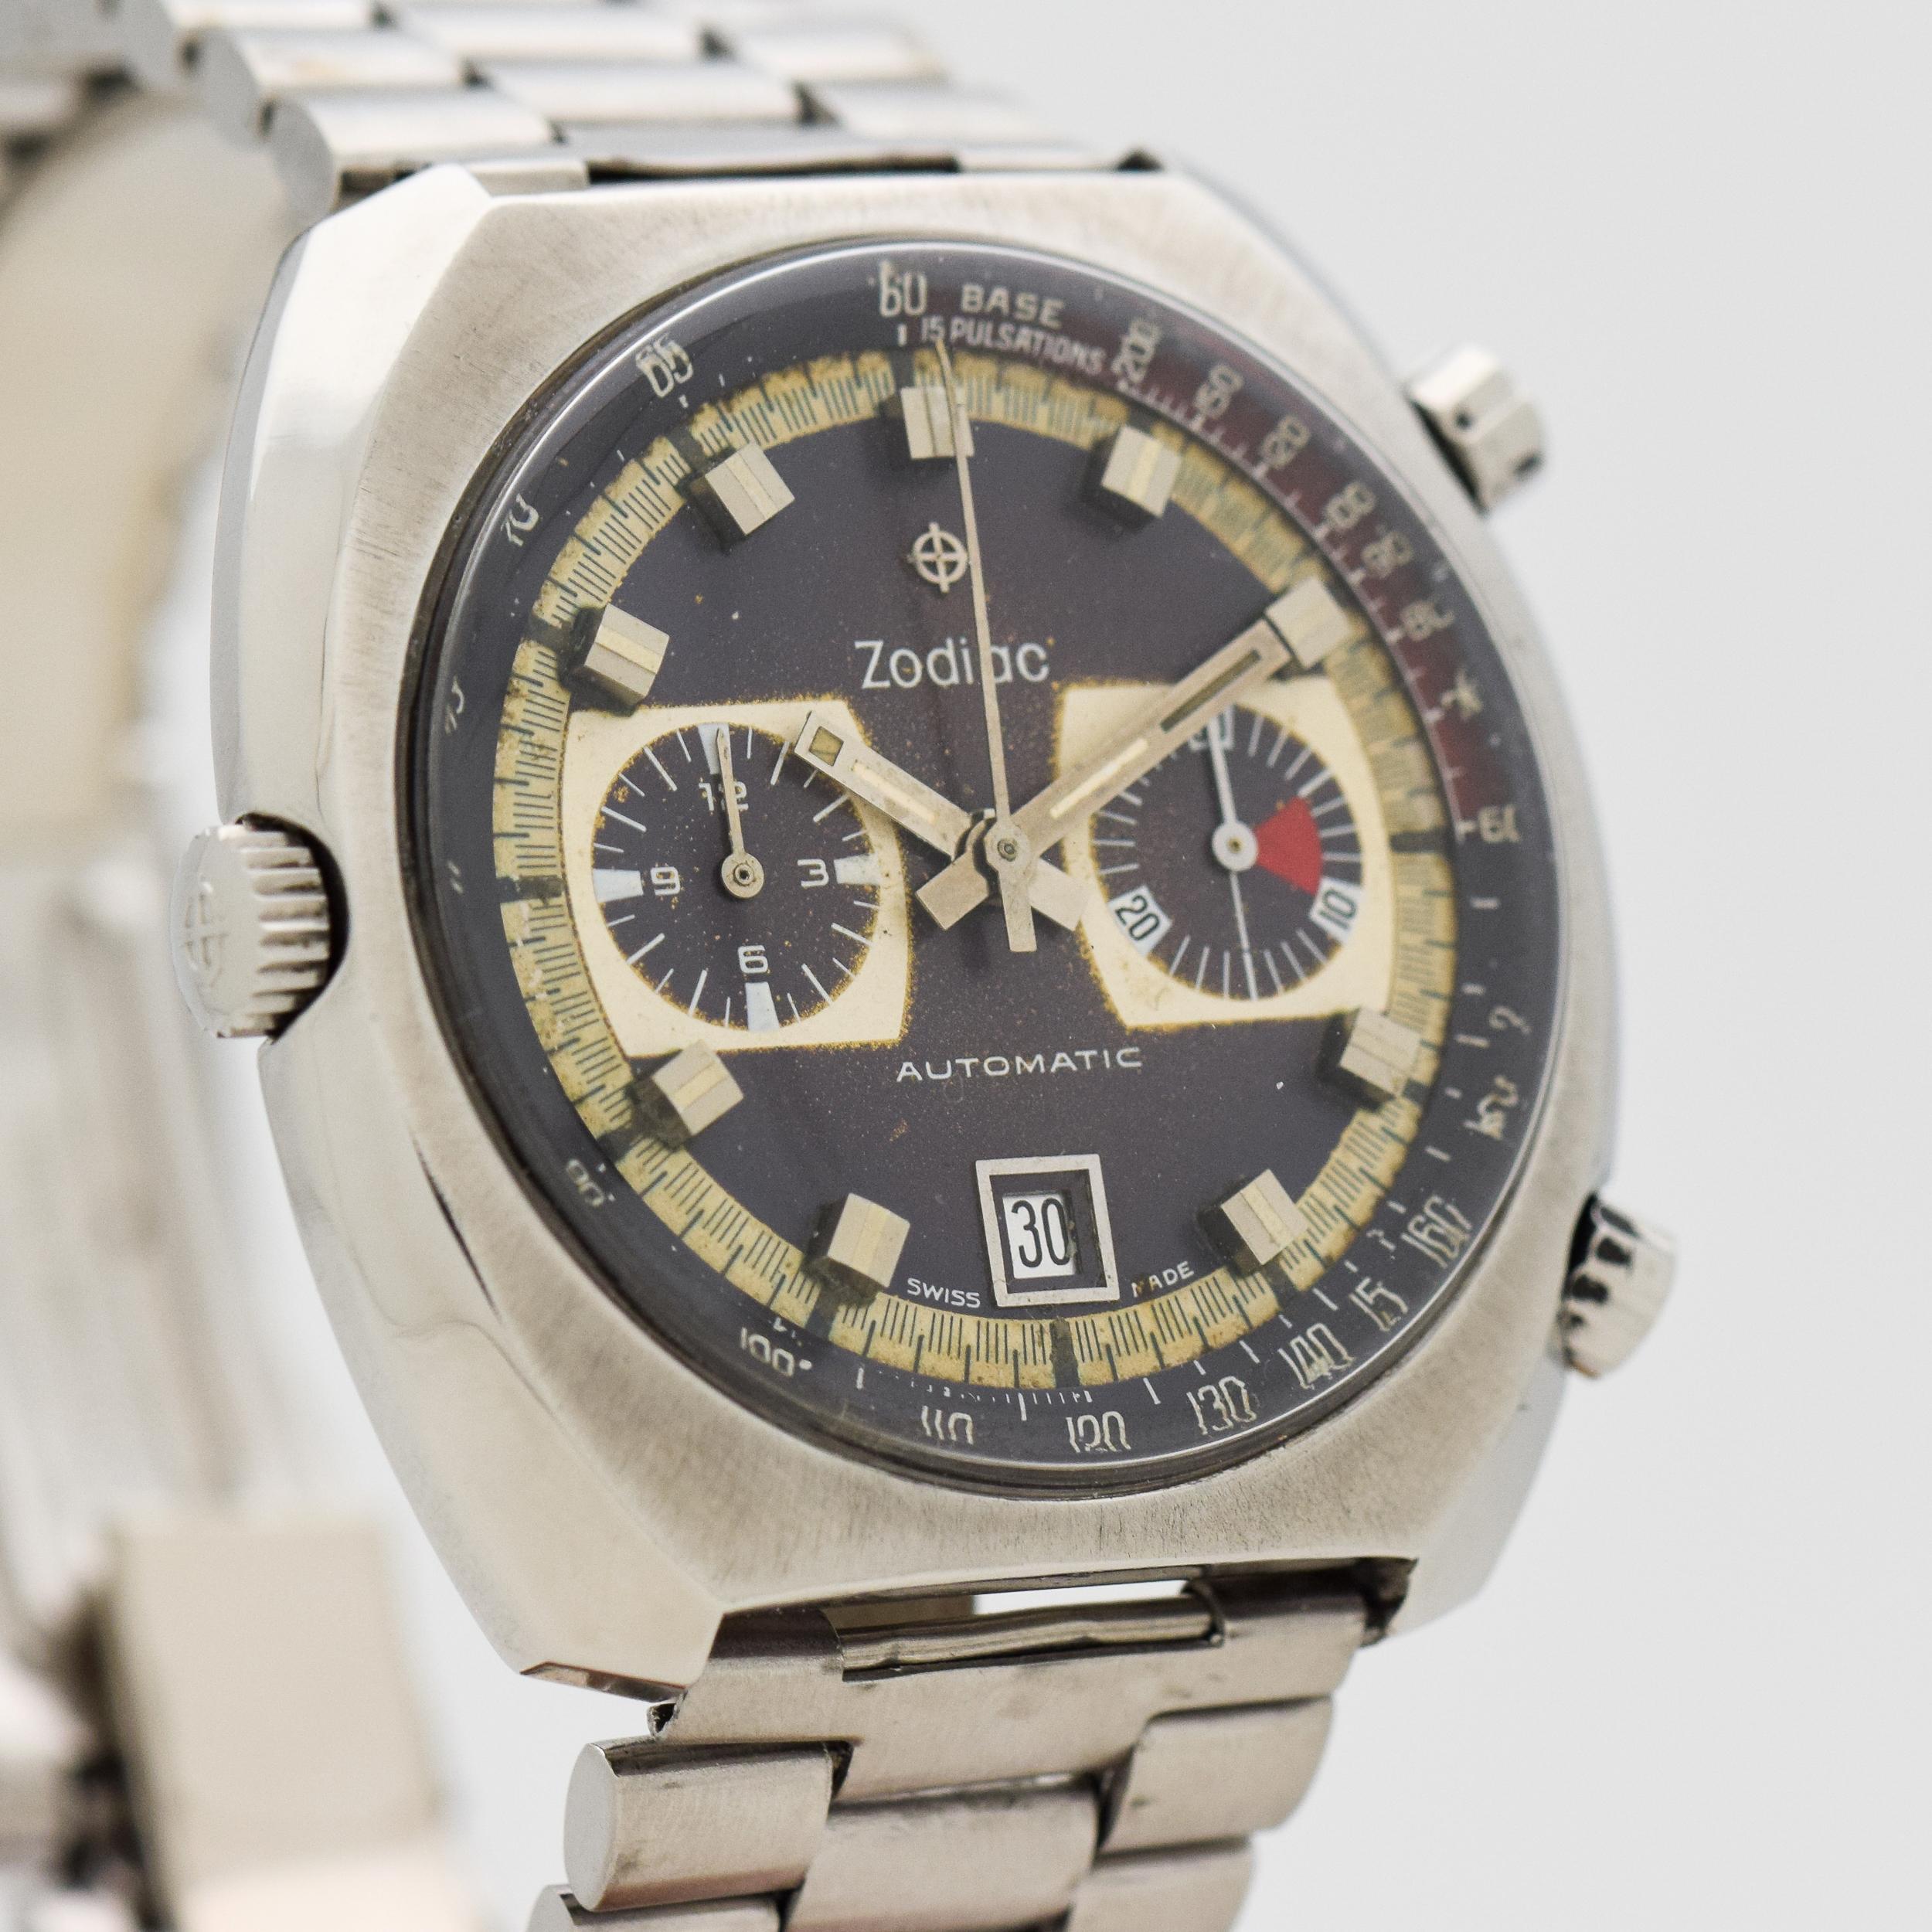 1970's Vintage Zodiac 2 Register Chronograph Stainless Steel Case with Original Two Tone Blue/Purple and Gray Dial with Applied Square Steel Markers with White Inlay with Original Zodiac Stainless Steel Bracelet. 42mm x 43mm lug to lug (1.65 in. x